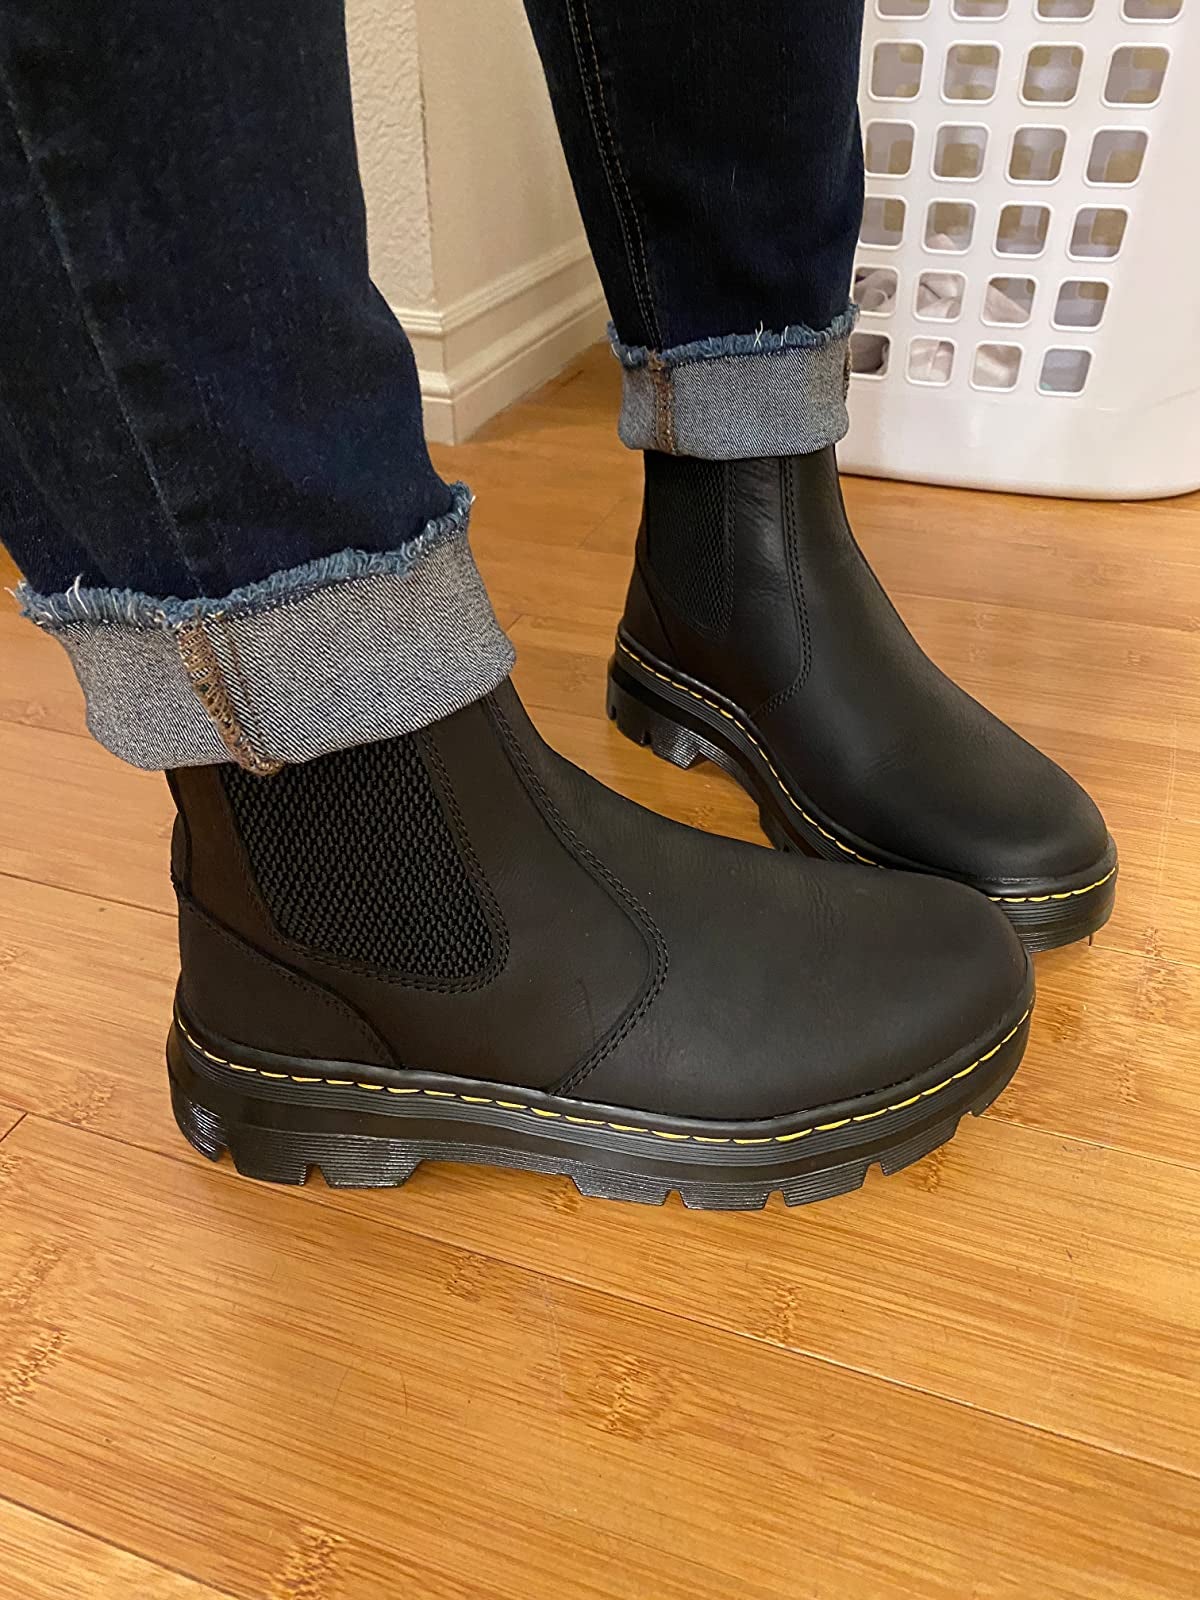 close up image of the black wyoming chelsea boots on a reviewer's feet